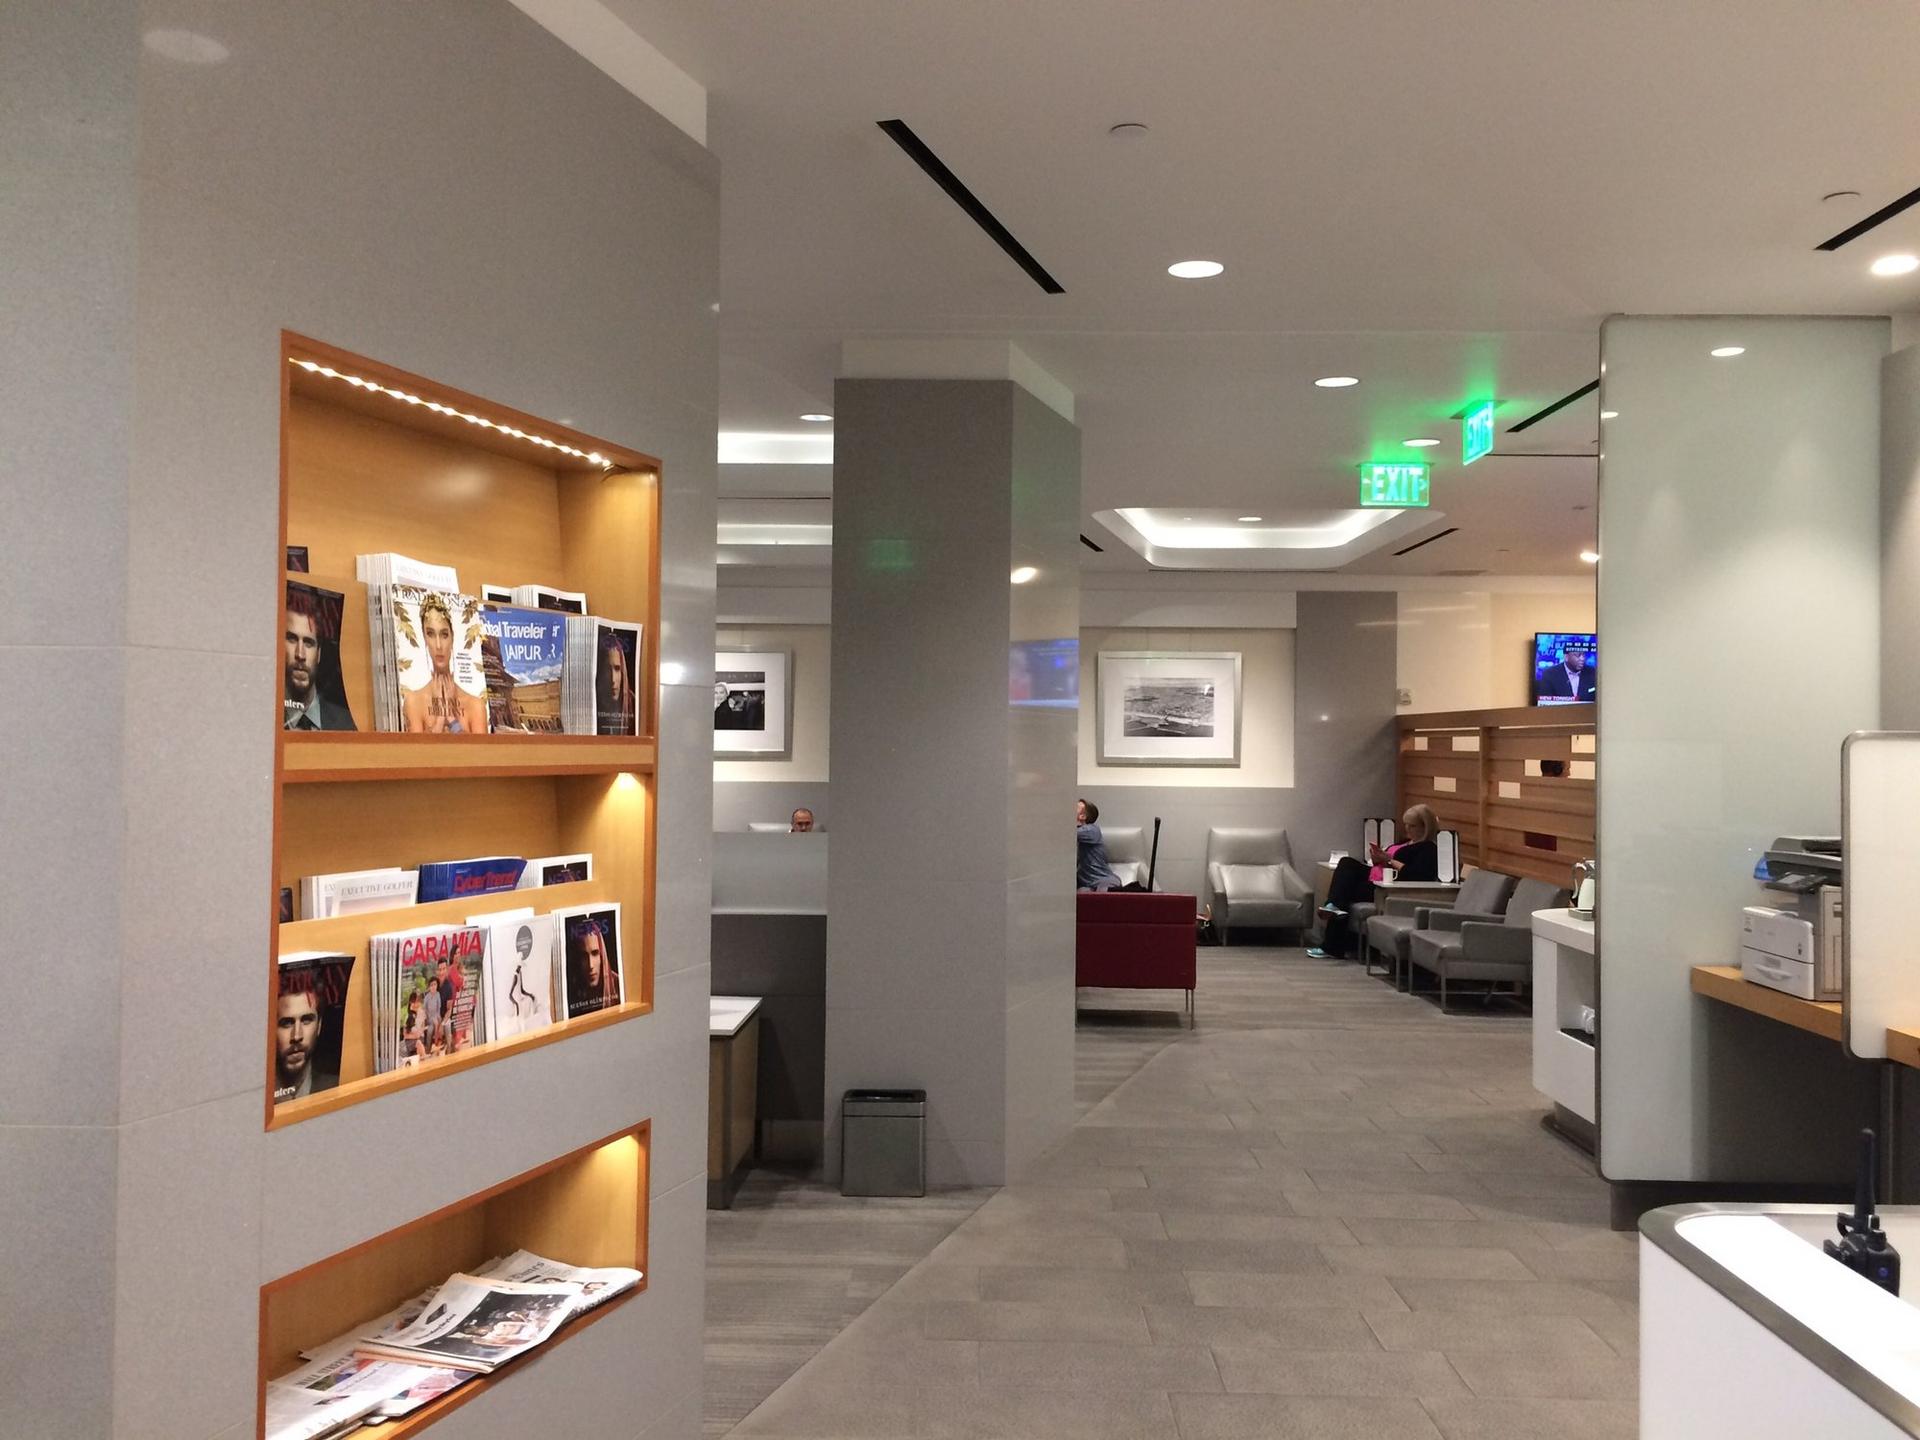 American Airlines Admirals Club image 13 of 43